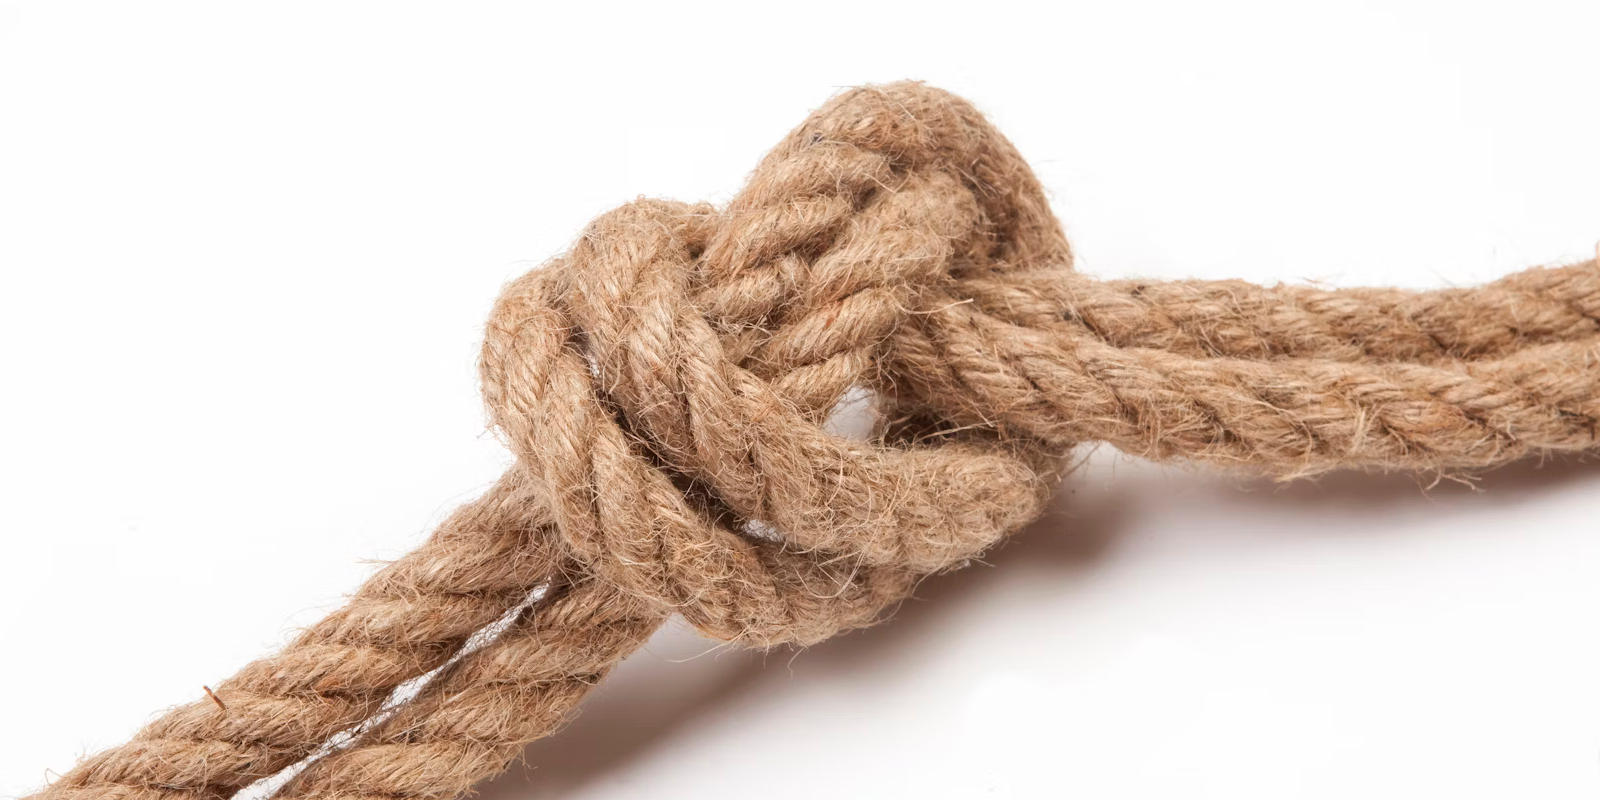 knotted rope on white background